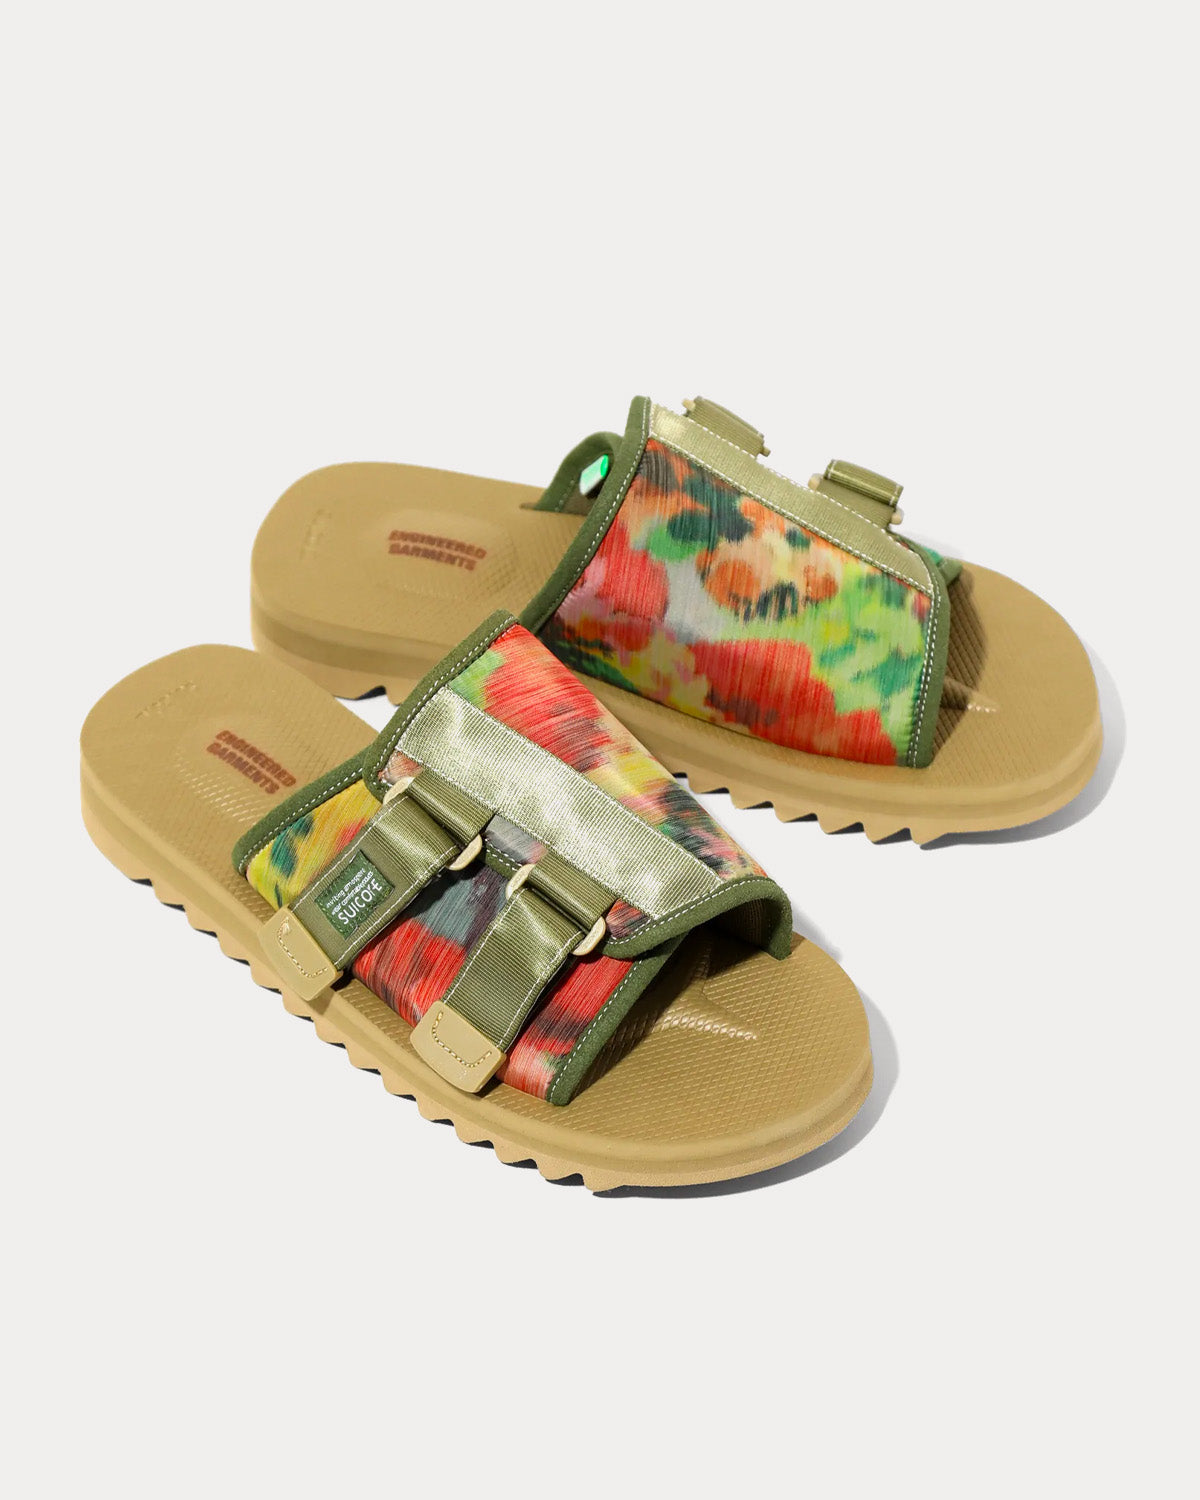 Suicoke x Engineered Garments - KAW-CabEG Floral Camo Sandals